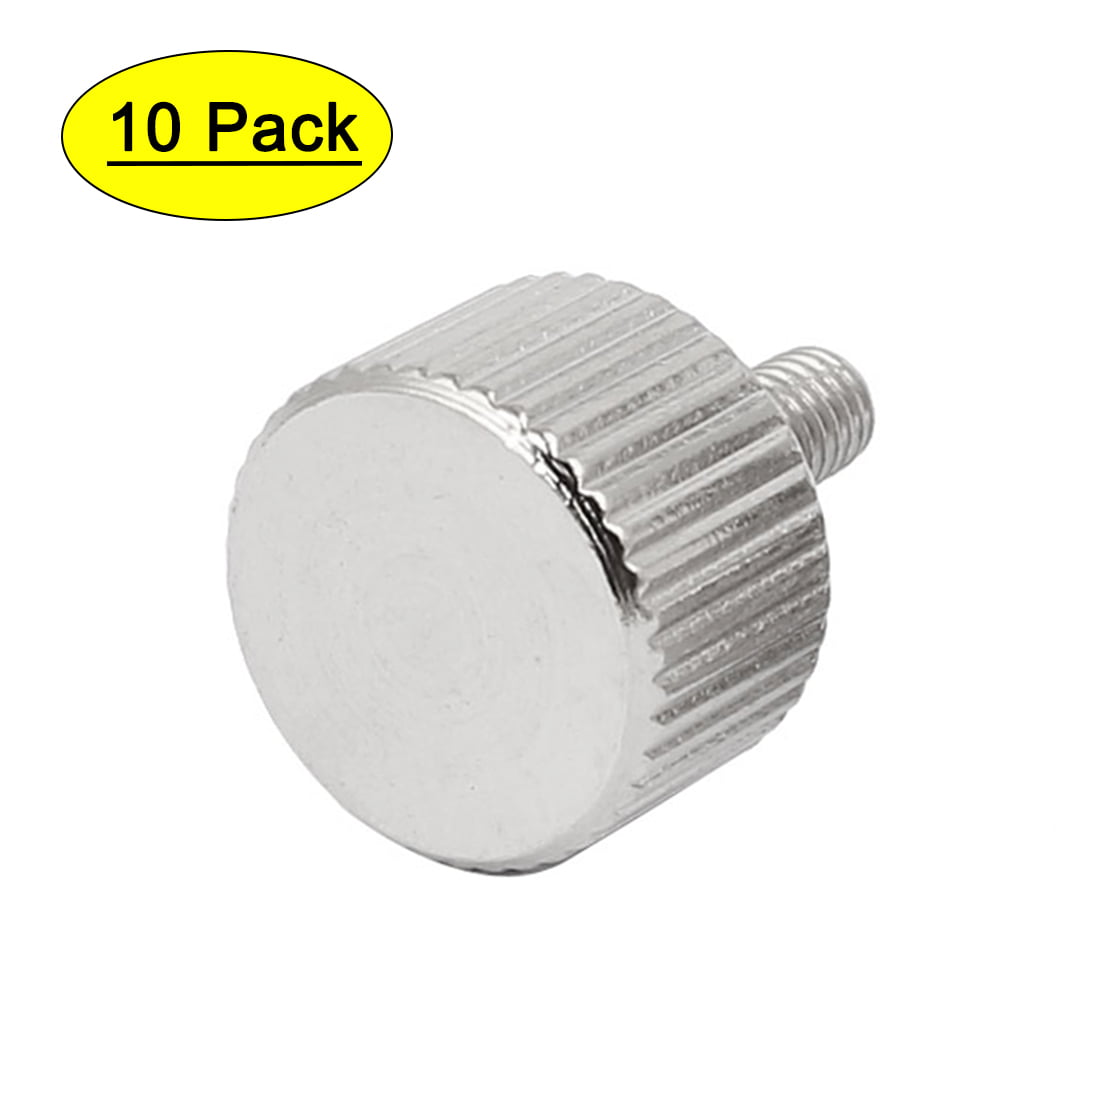 M3x8mm Nickel Plated Flat Head Knurled Thumb Screw 50pcs for Computer PC Case 